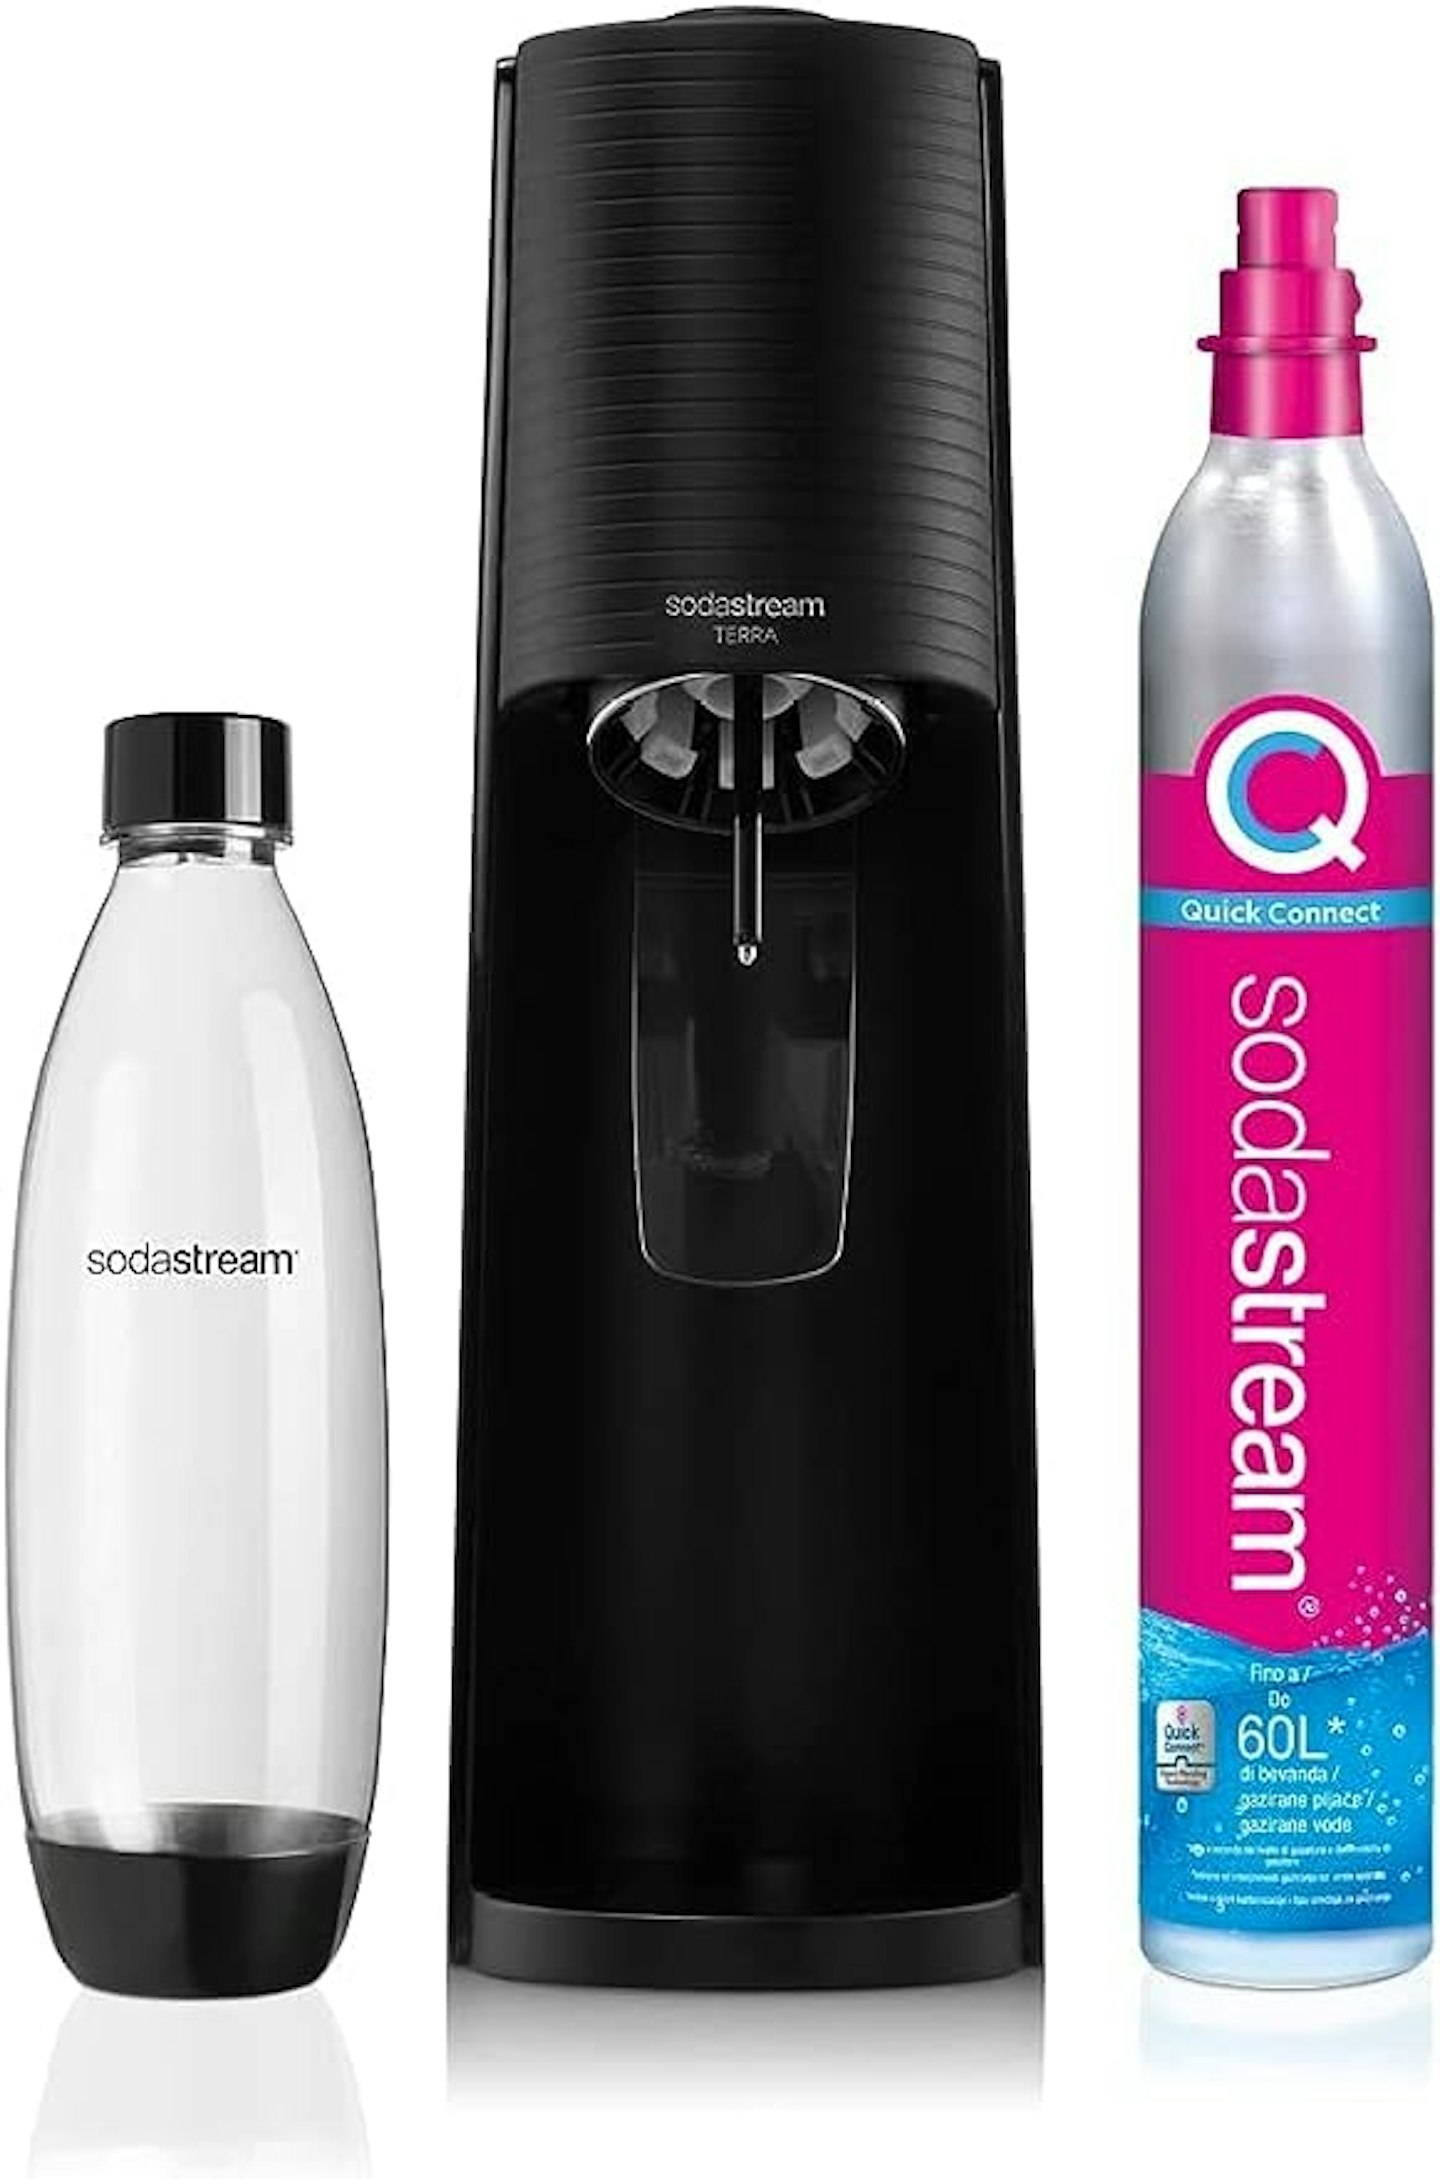 SodaStream - Best gifts for foodies